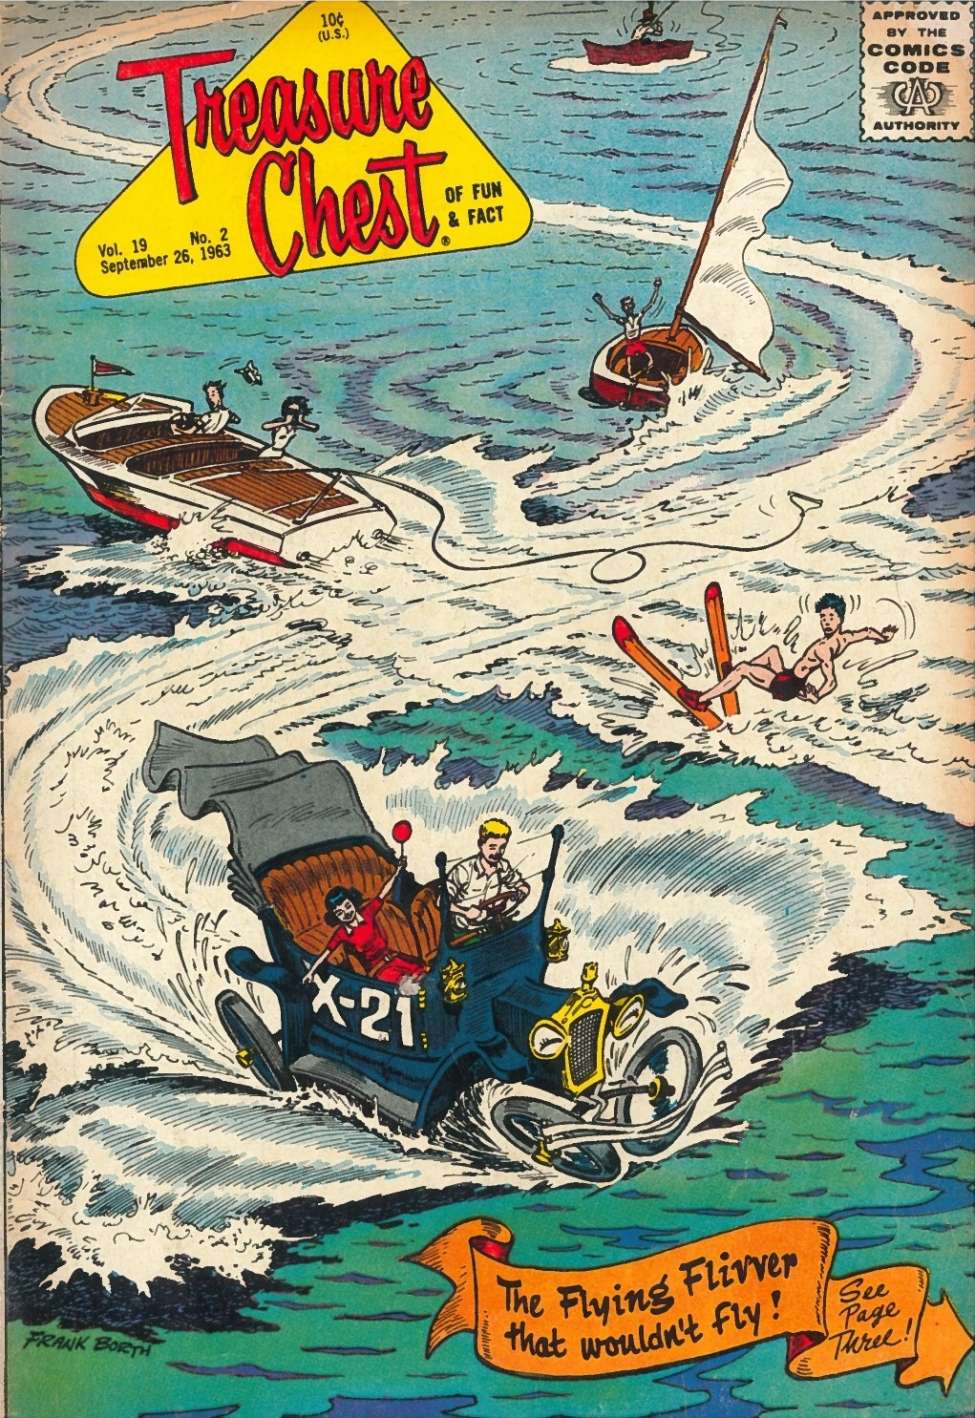 Comic Book Cover For Treasure Chest of Fun and Fact v19 2